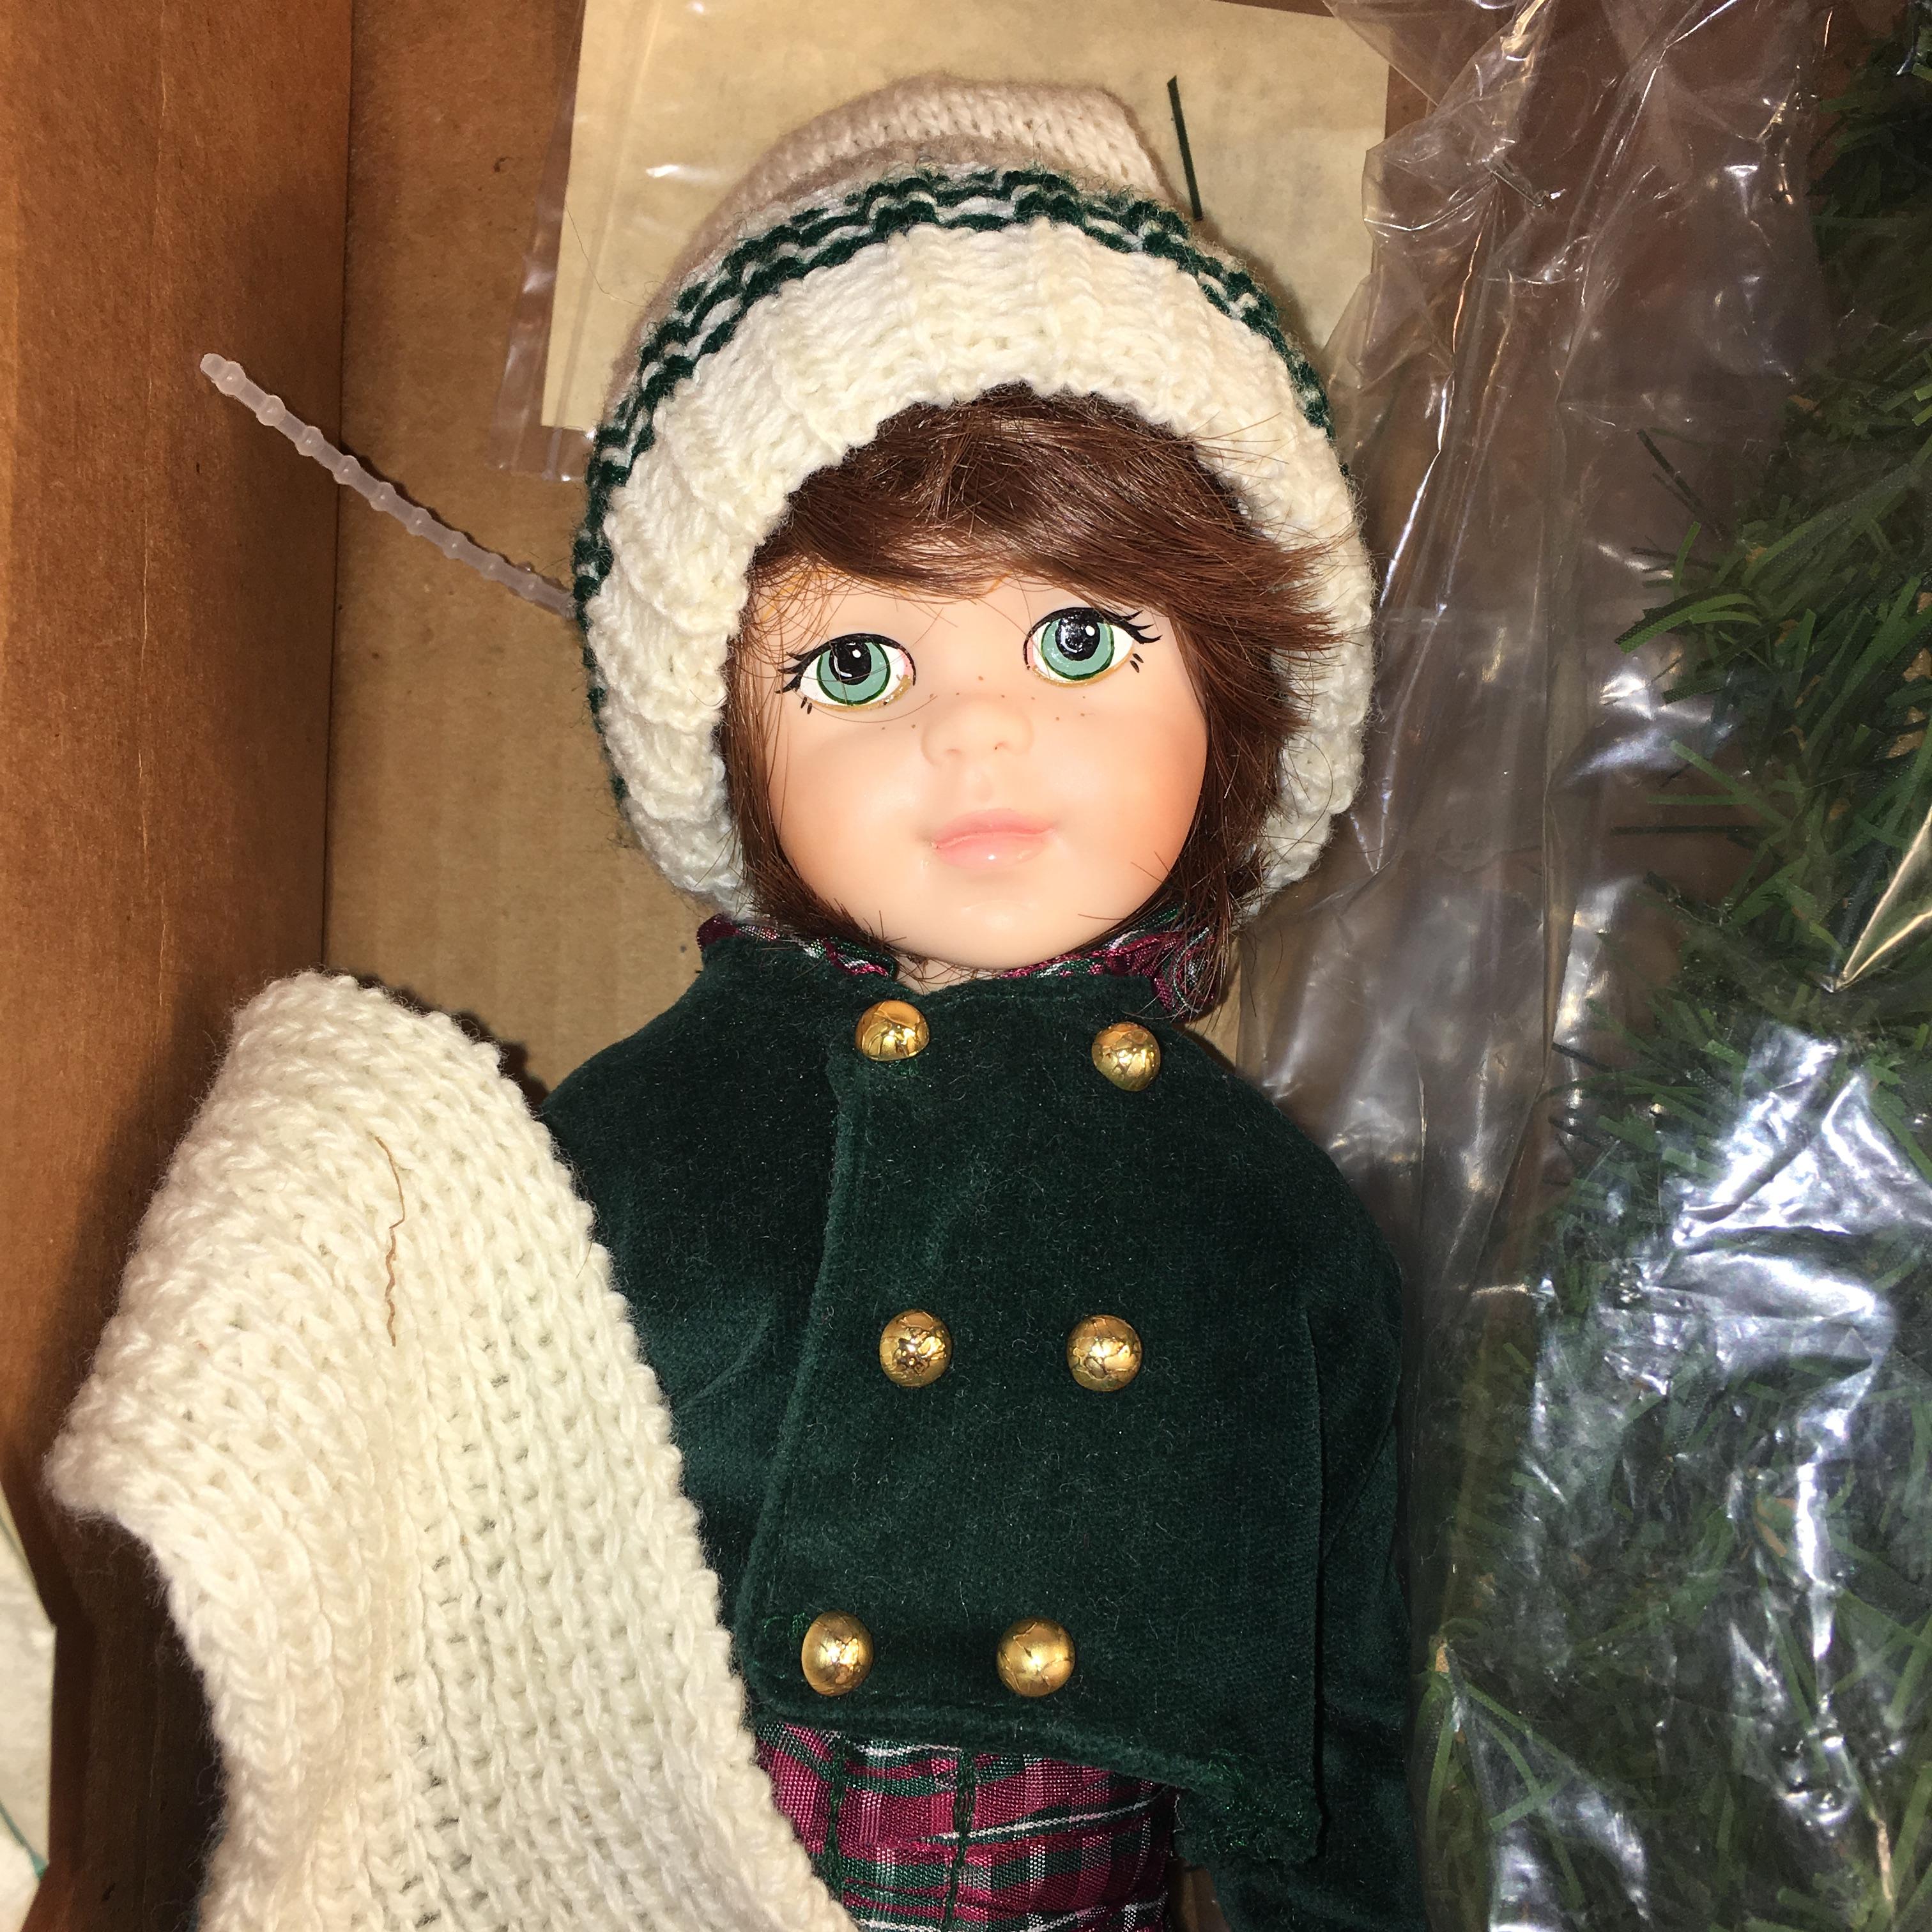 Collector 1988 Robin Woods The Christmas Collection "Dickens" Doll 18"tall Box Size